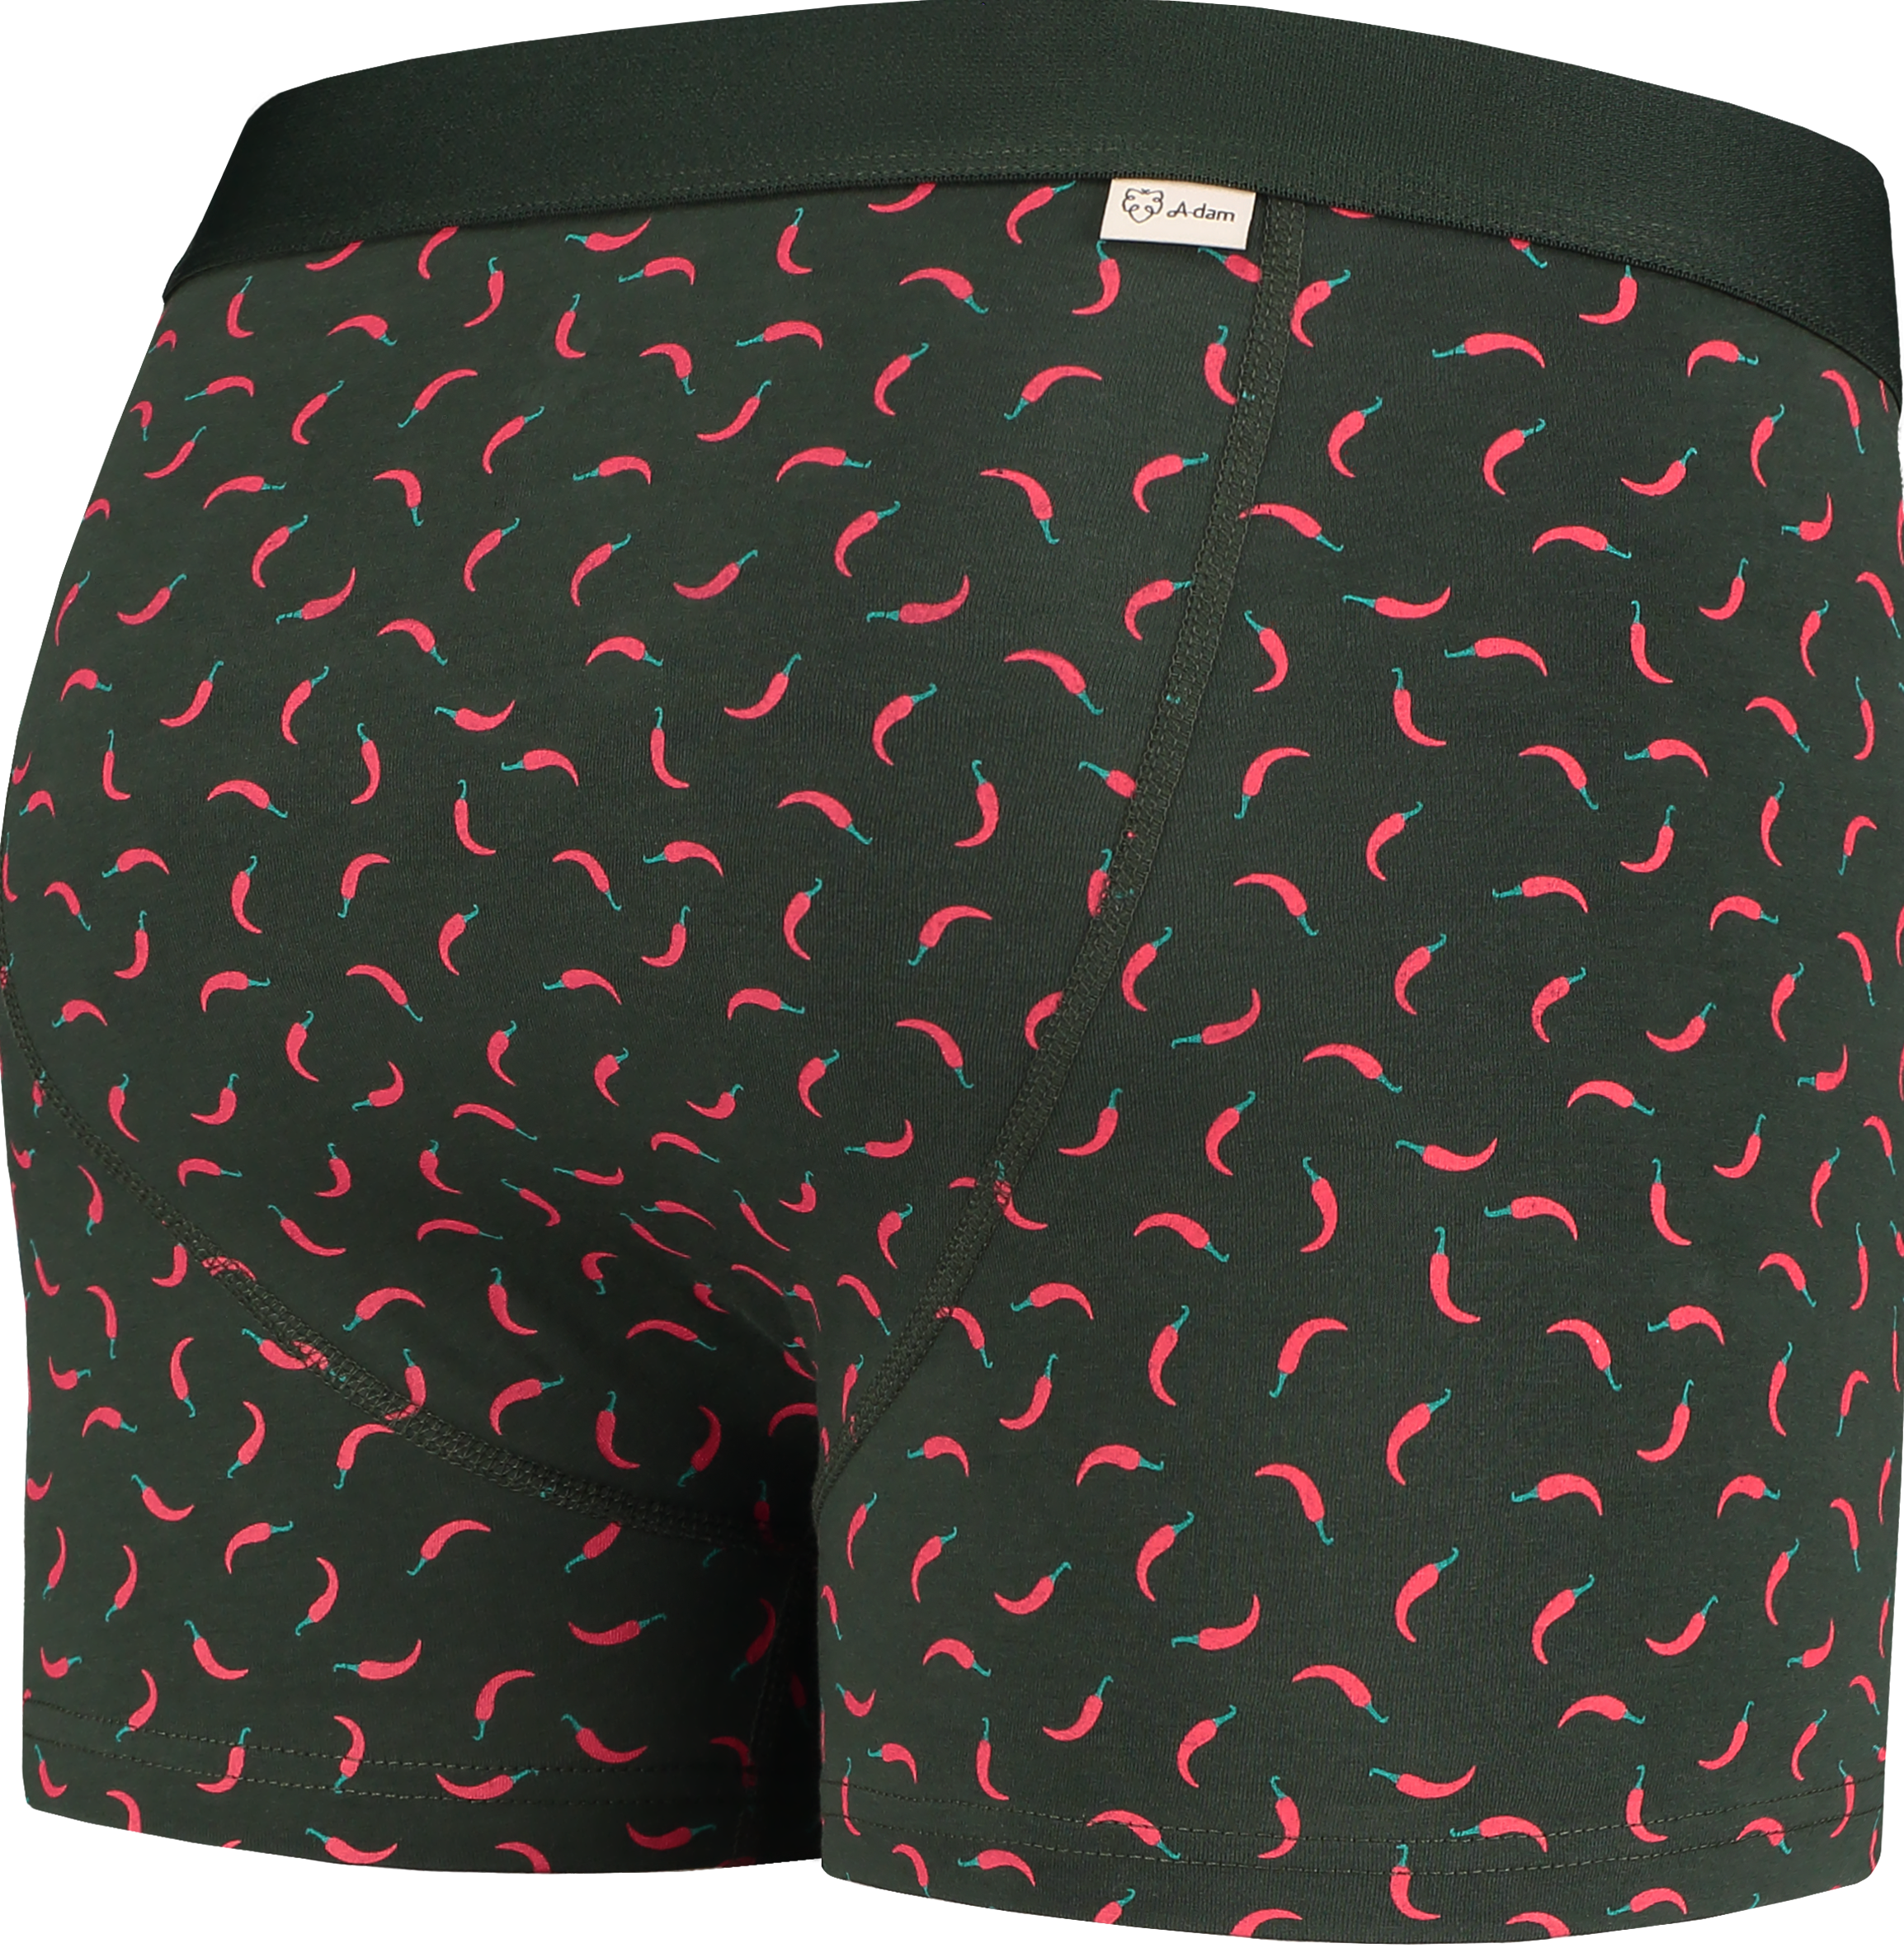 A-dam green boxer briefs with chilli peppers from GOTS organic cotton